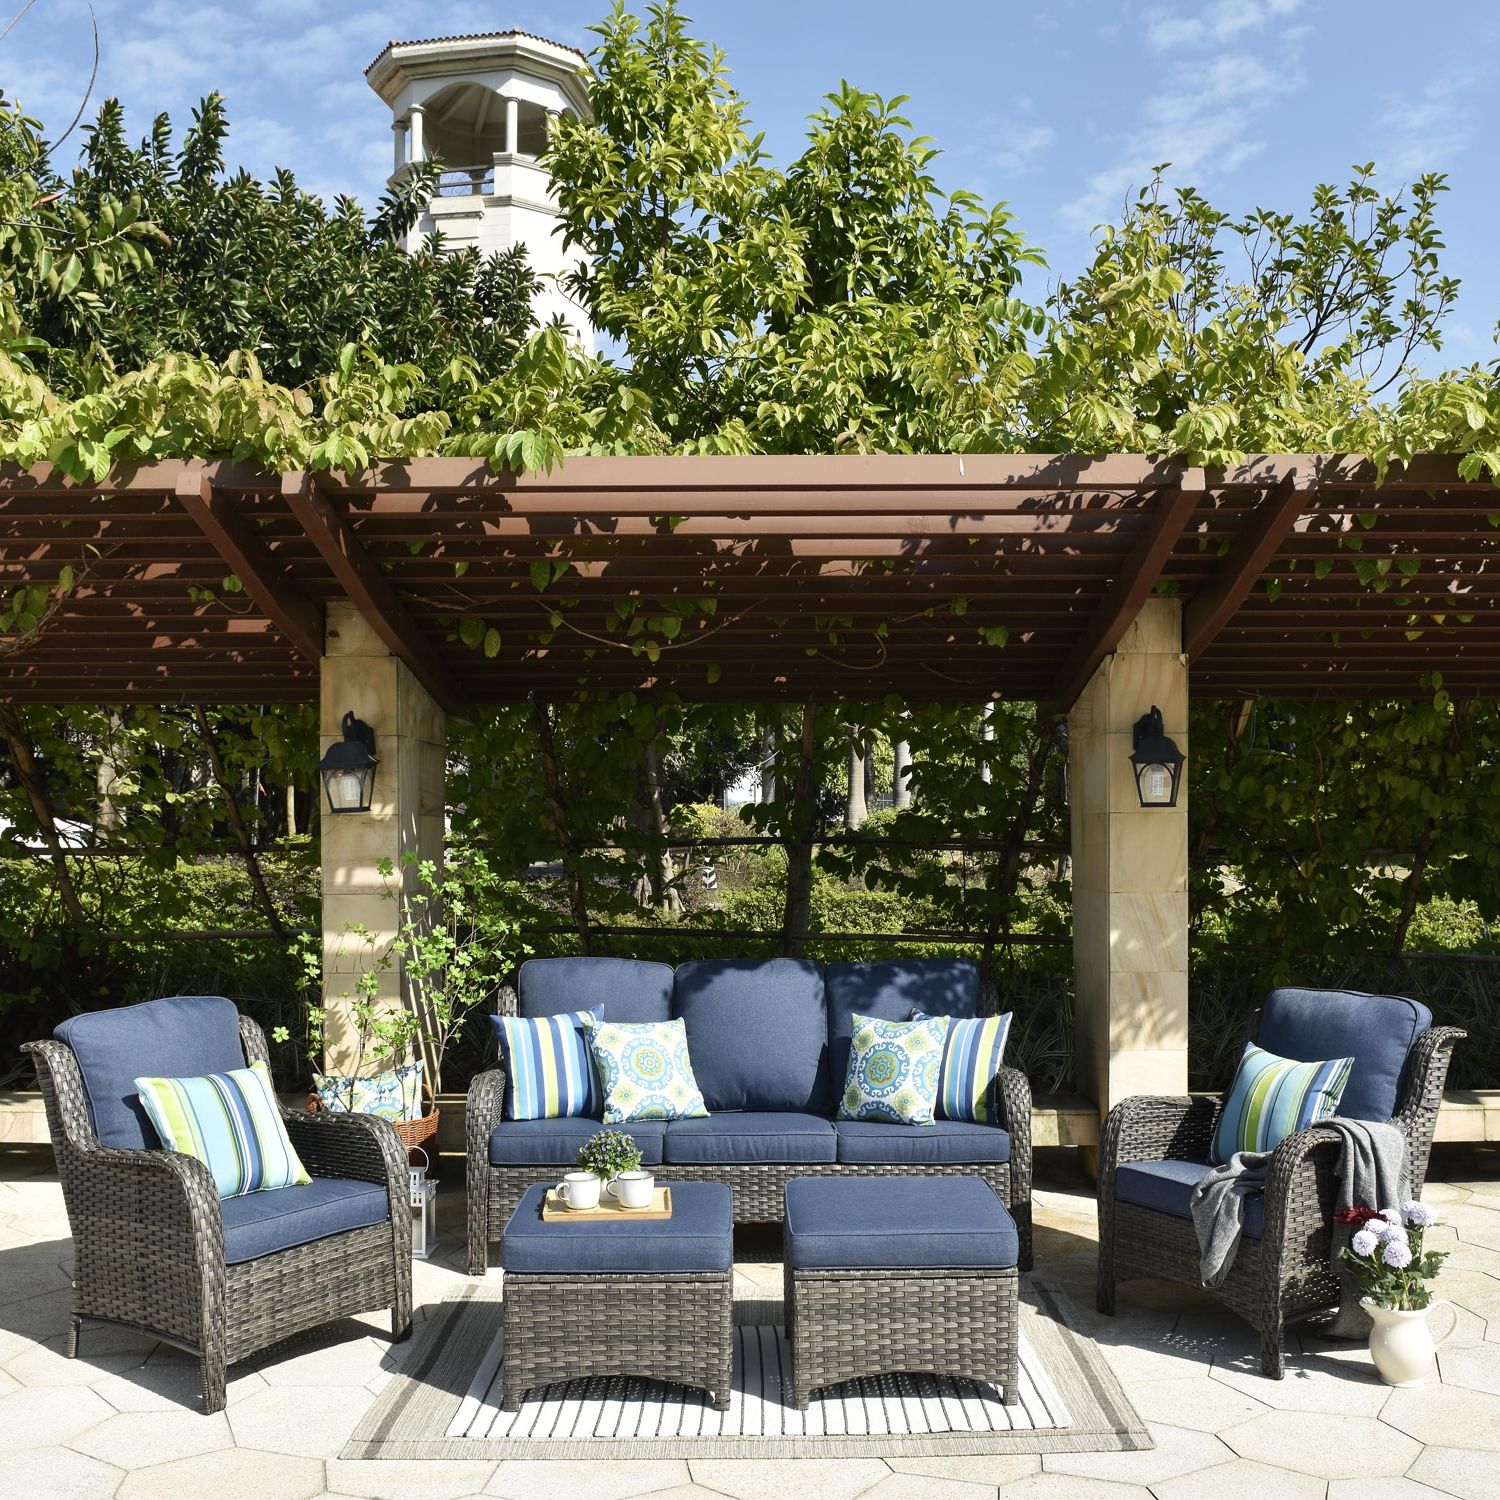 5 Piece Patio Conversation Set Pertaining To Best And Newest Ovios 5 Piece Rattan Patio Conversation Set With Blue Cushions In The Patio  Conversation Sets Department At Lowes (View 2 of 16)